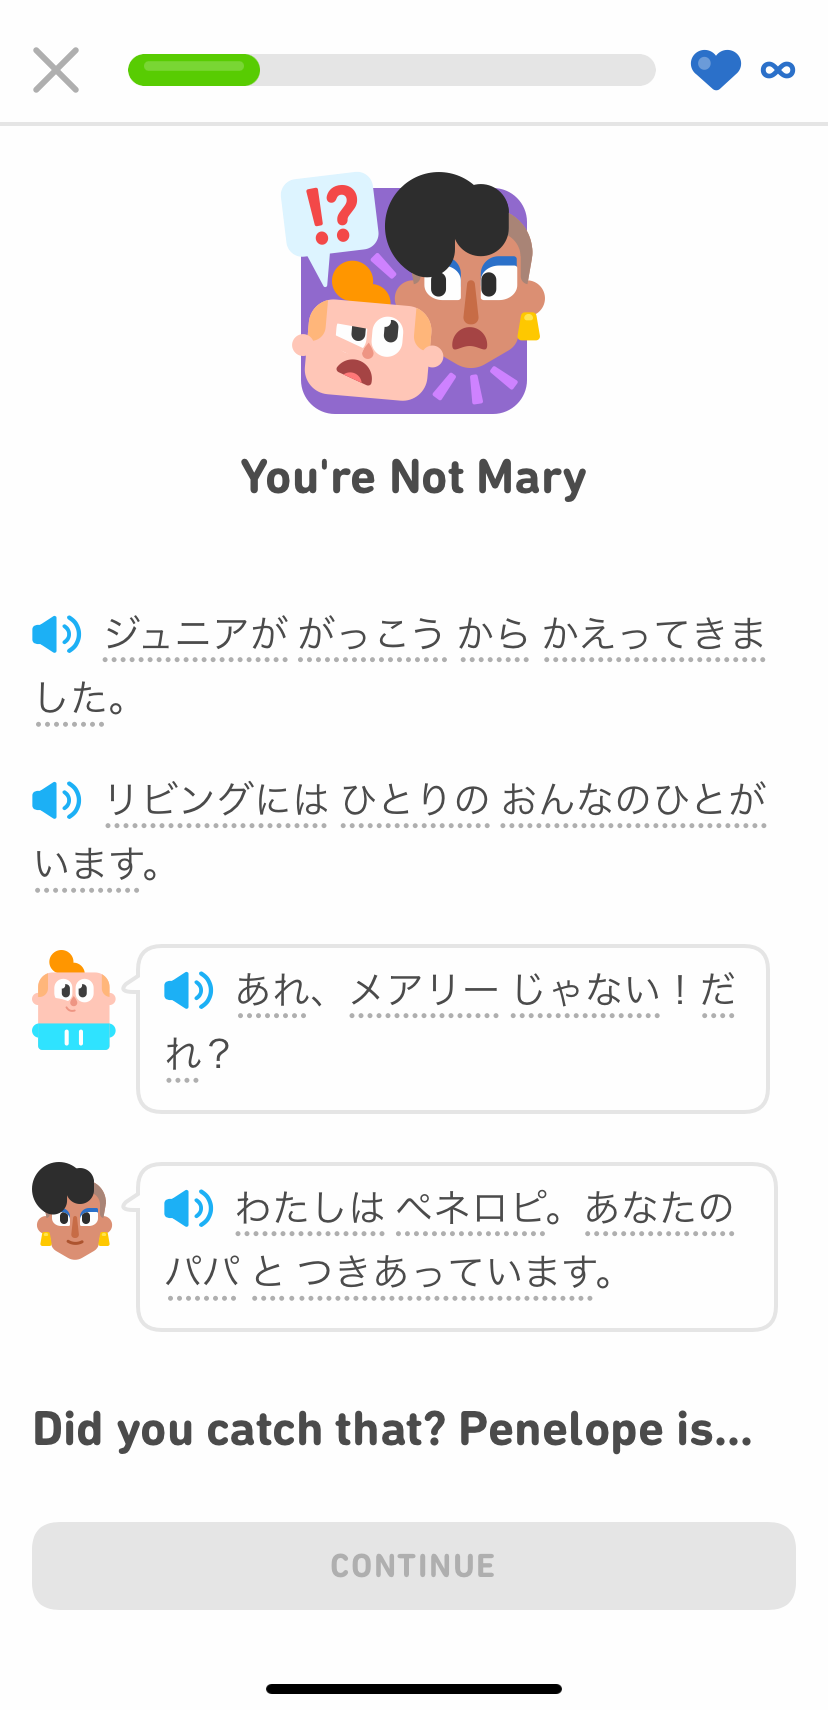 Screenshot of a Japanese Story titled "You're Not Mary" that starts with a thumbnail picture of Junior looking at a woman in confusion. Several lines of narration and dialogue follow, and then appears the question "Did you catch that? Penelope is..."